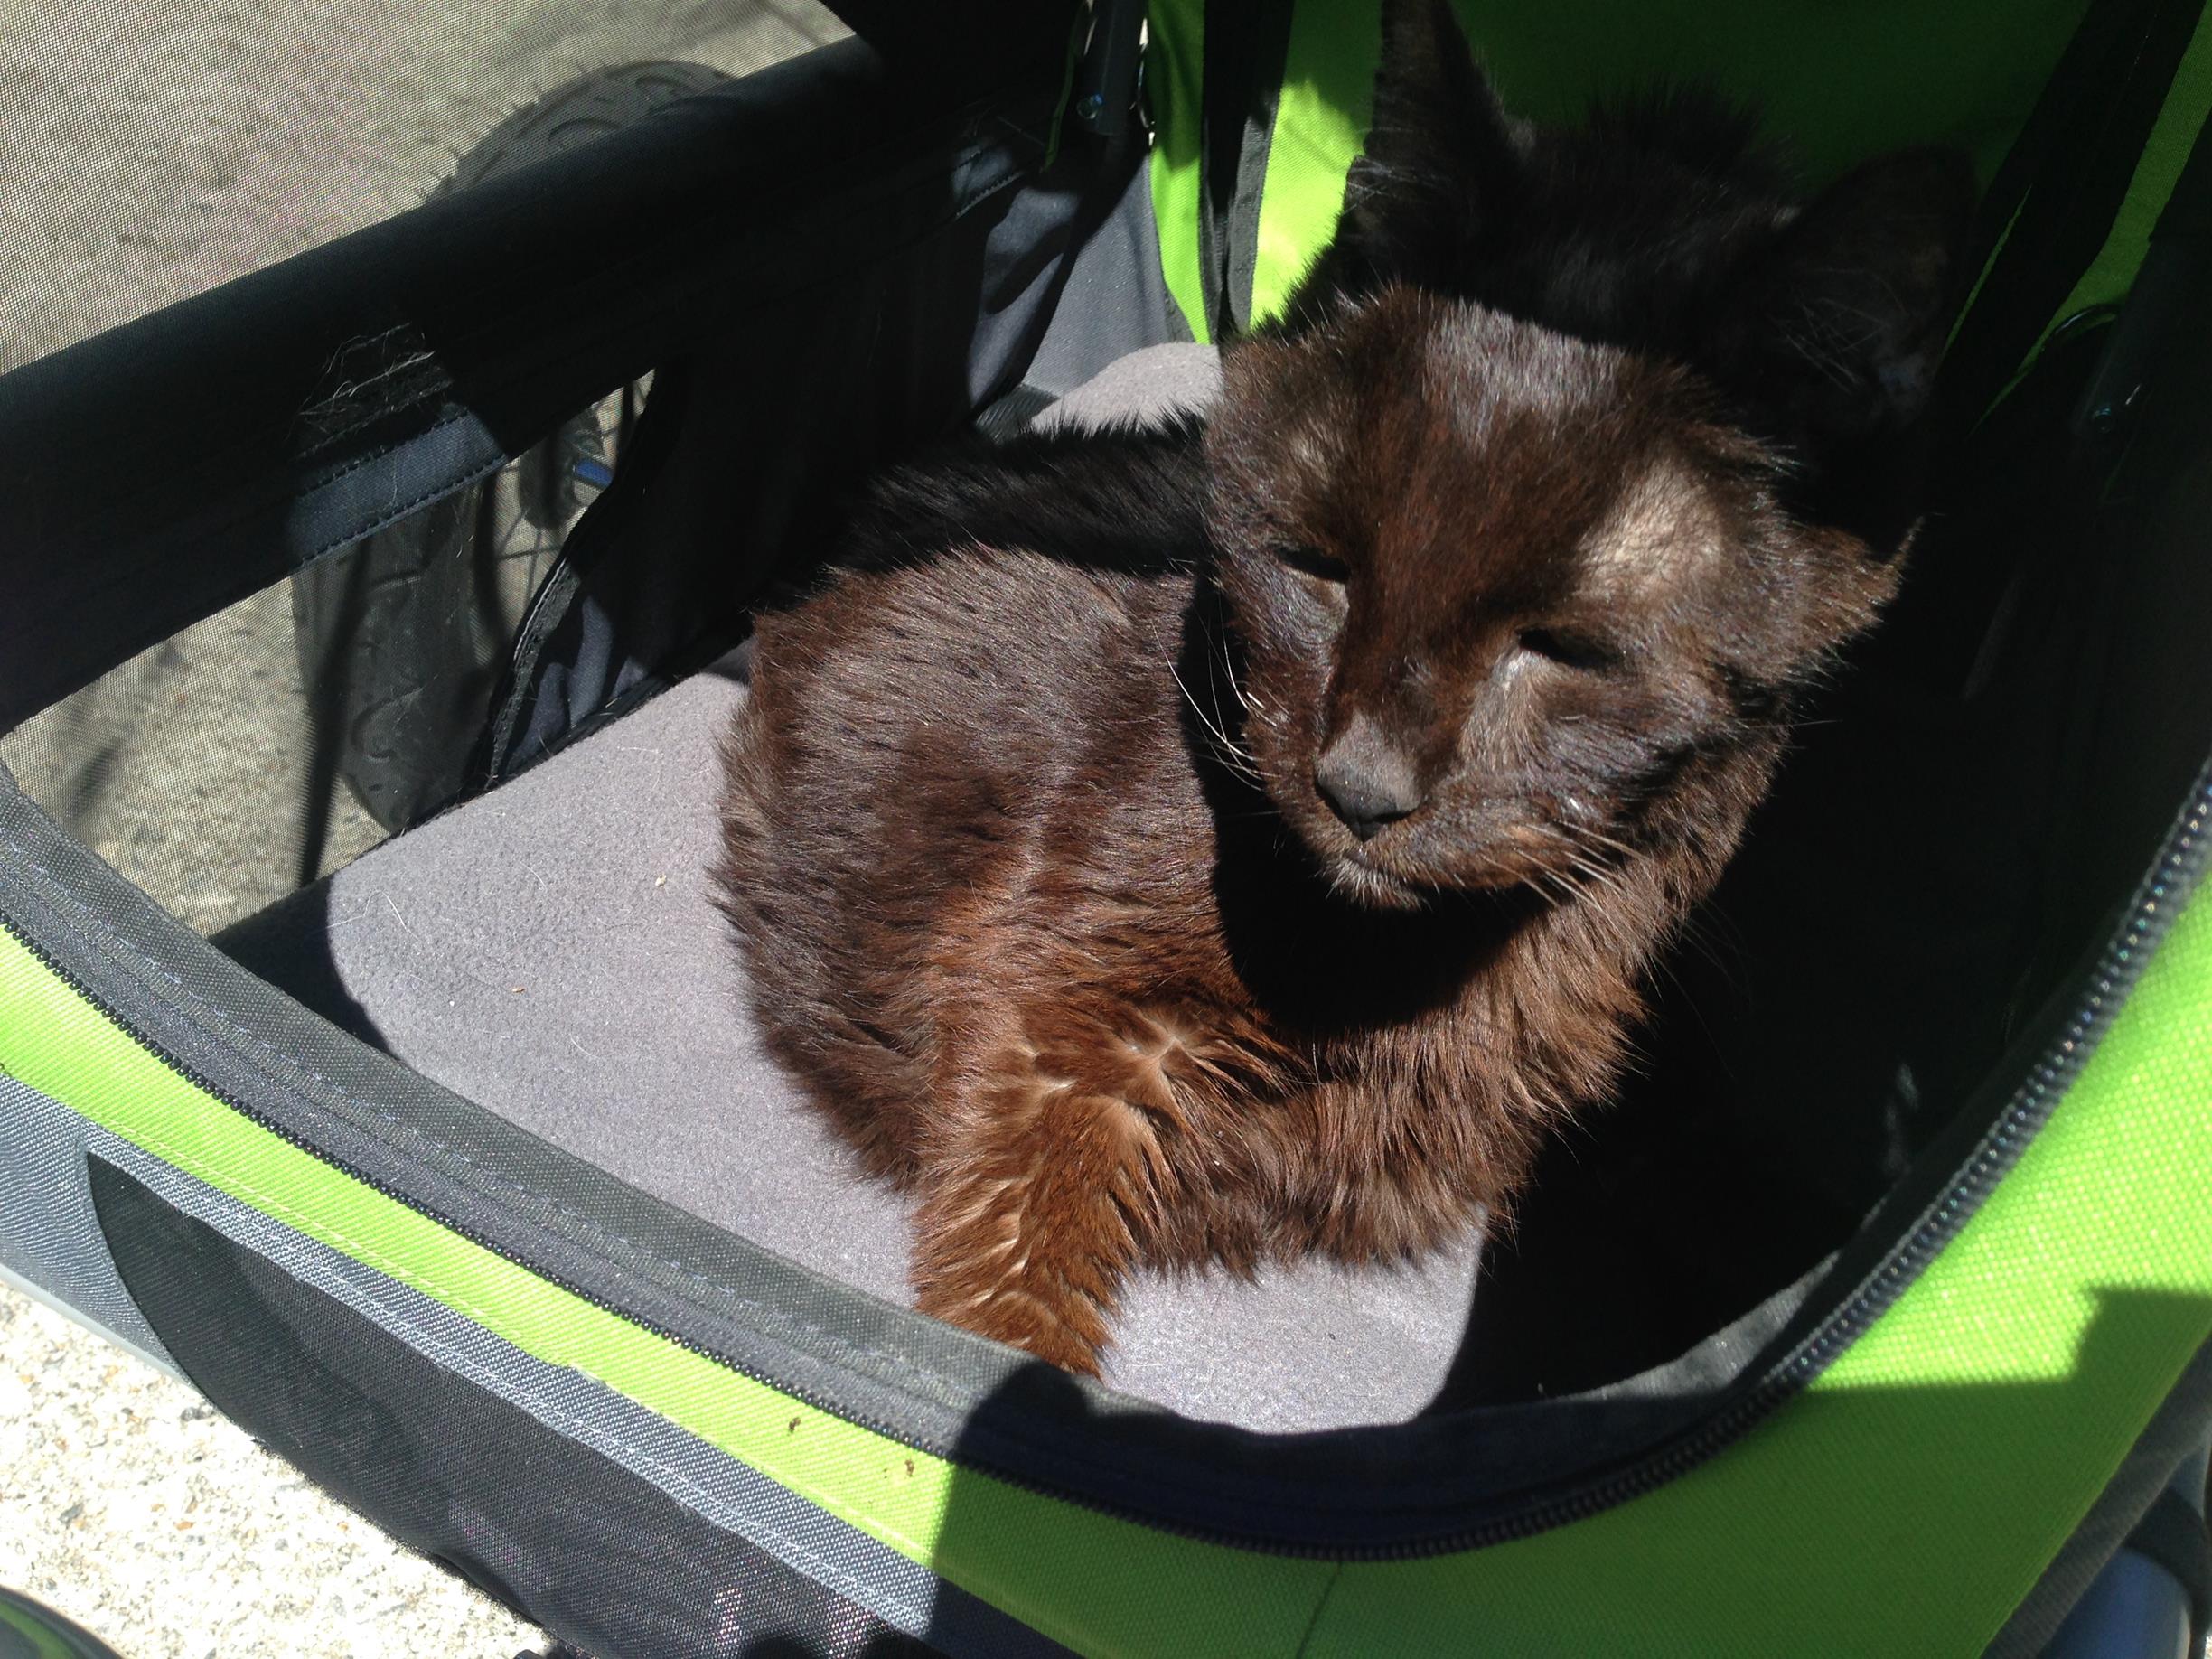 Strollers provide great enrichment for seniors & handicapped cats!